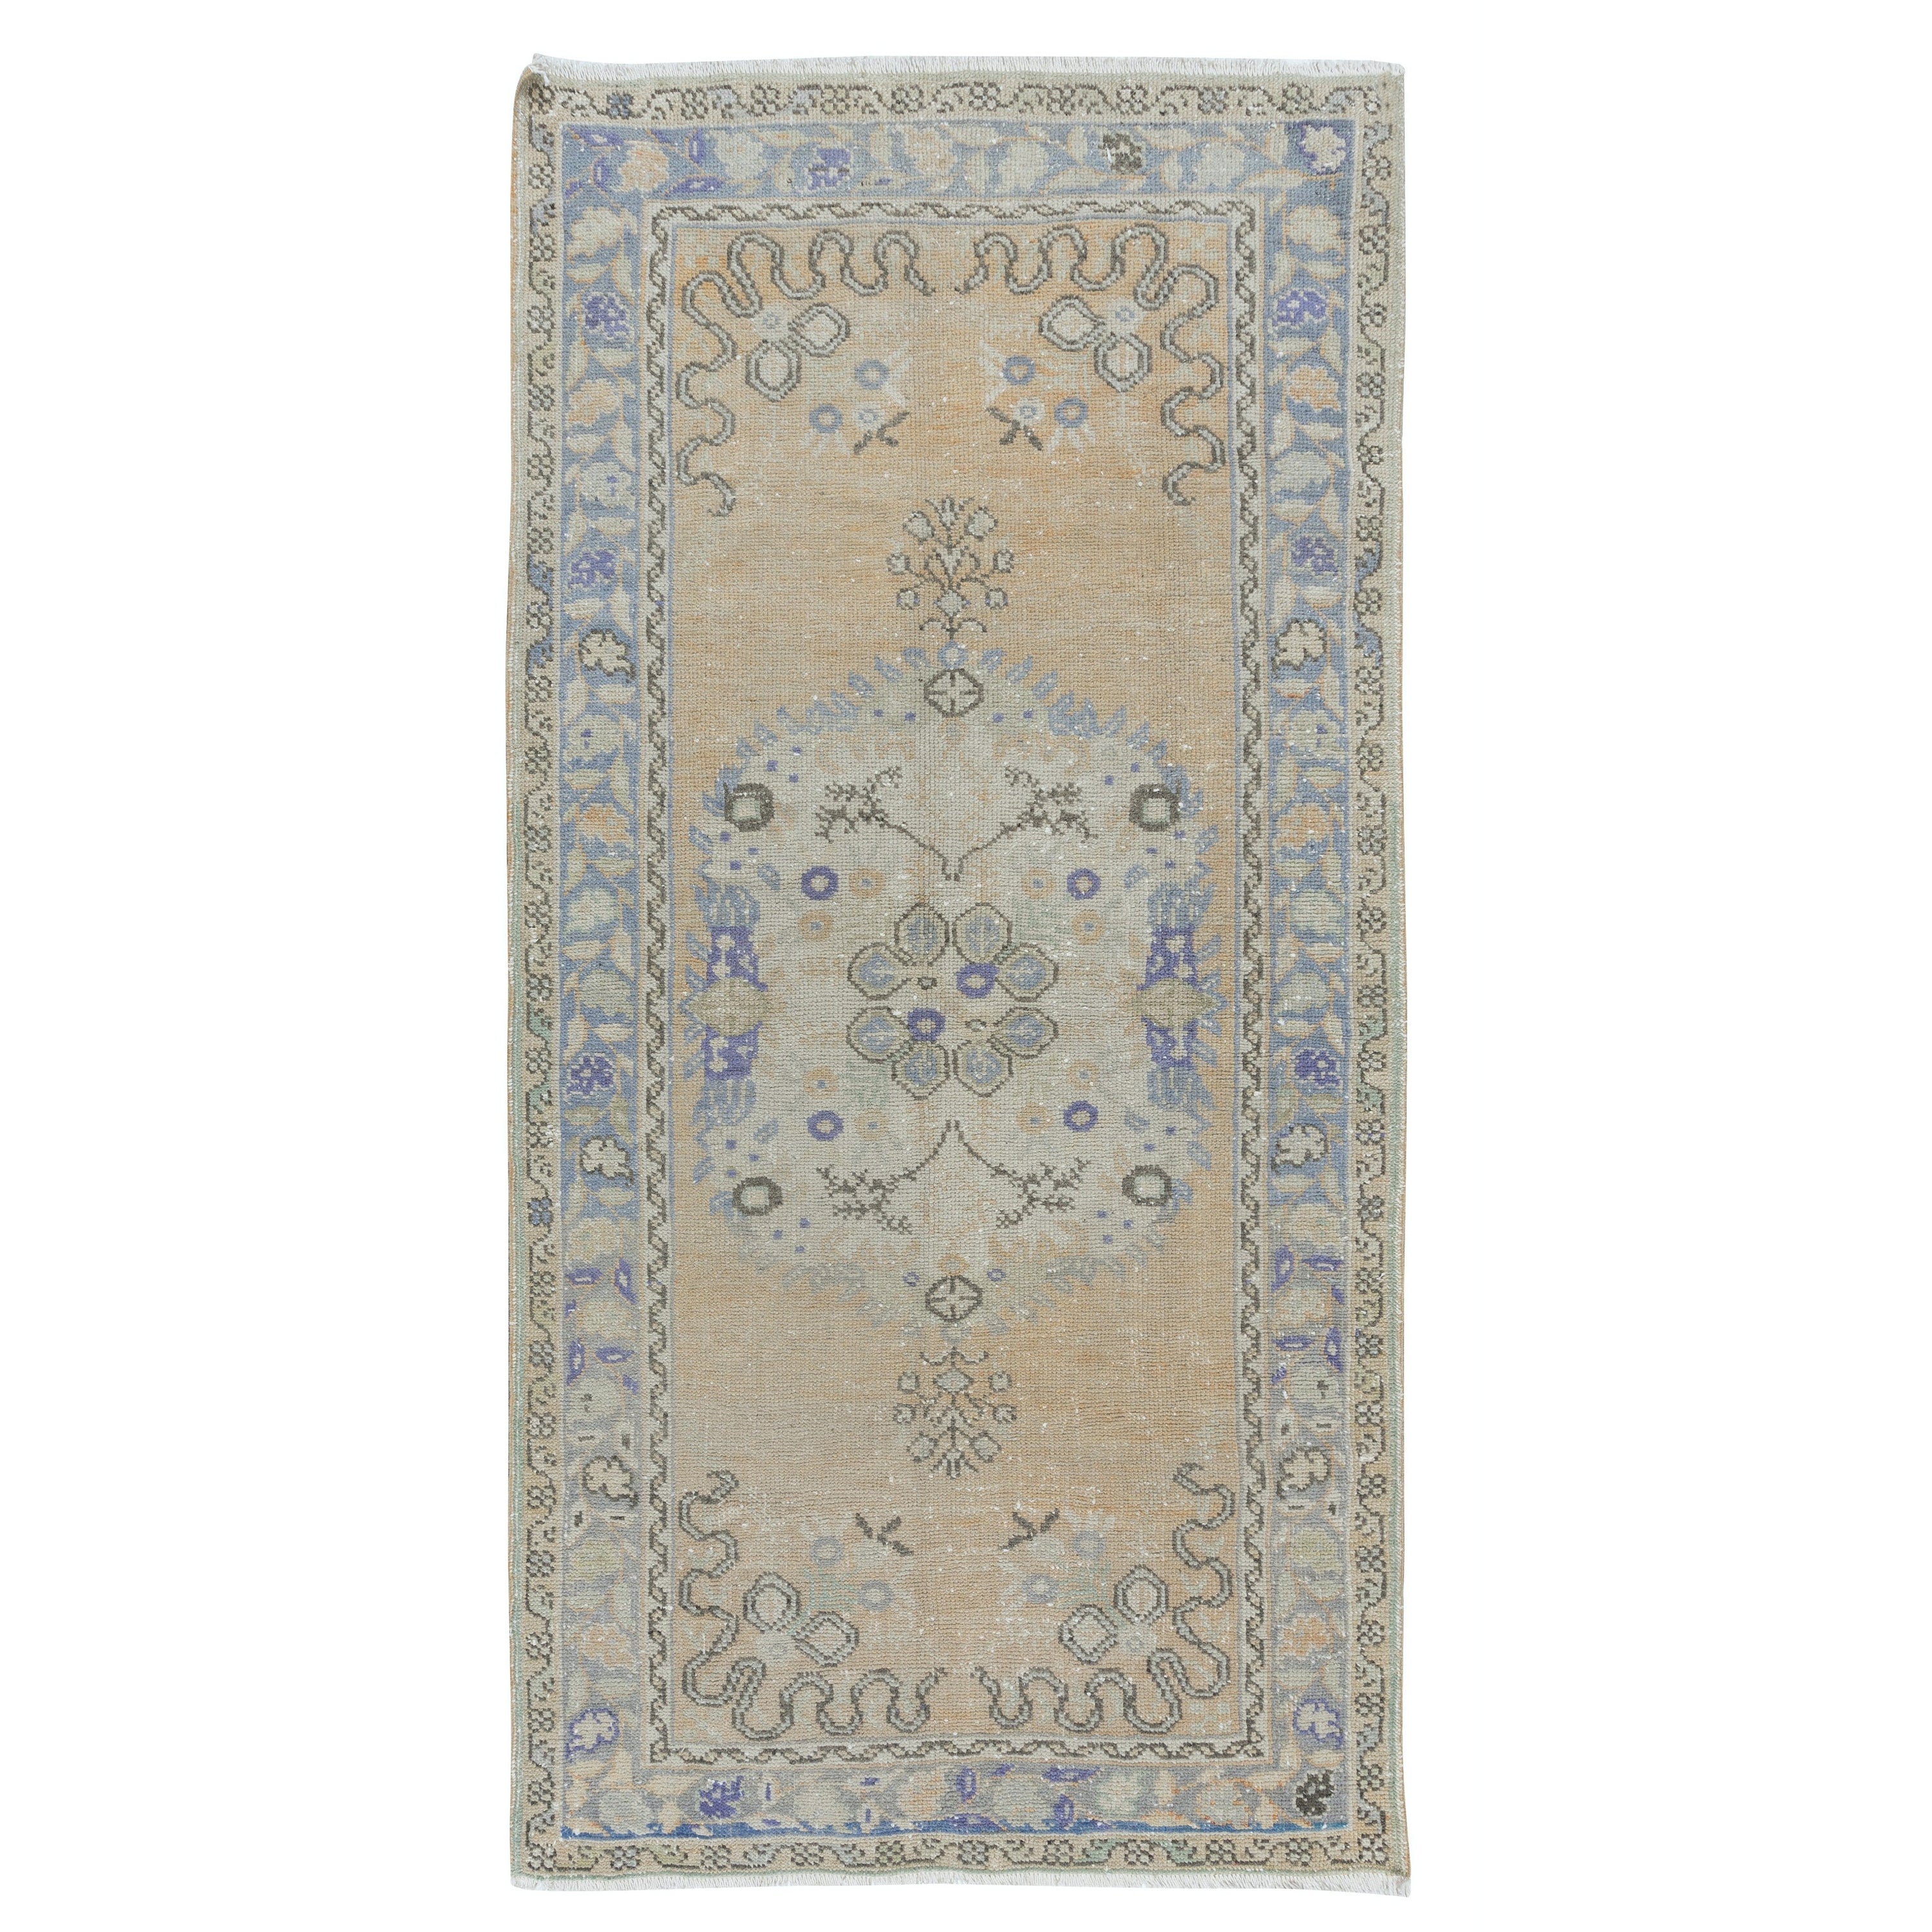 3.2x6.5 Ft Hand Knotted Turkish Rug with Soft Colors, Mid-20th Century Carpet